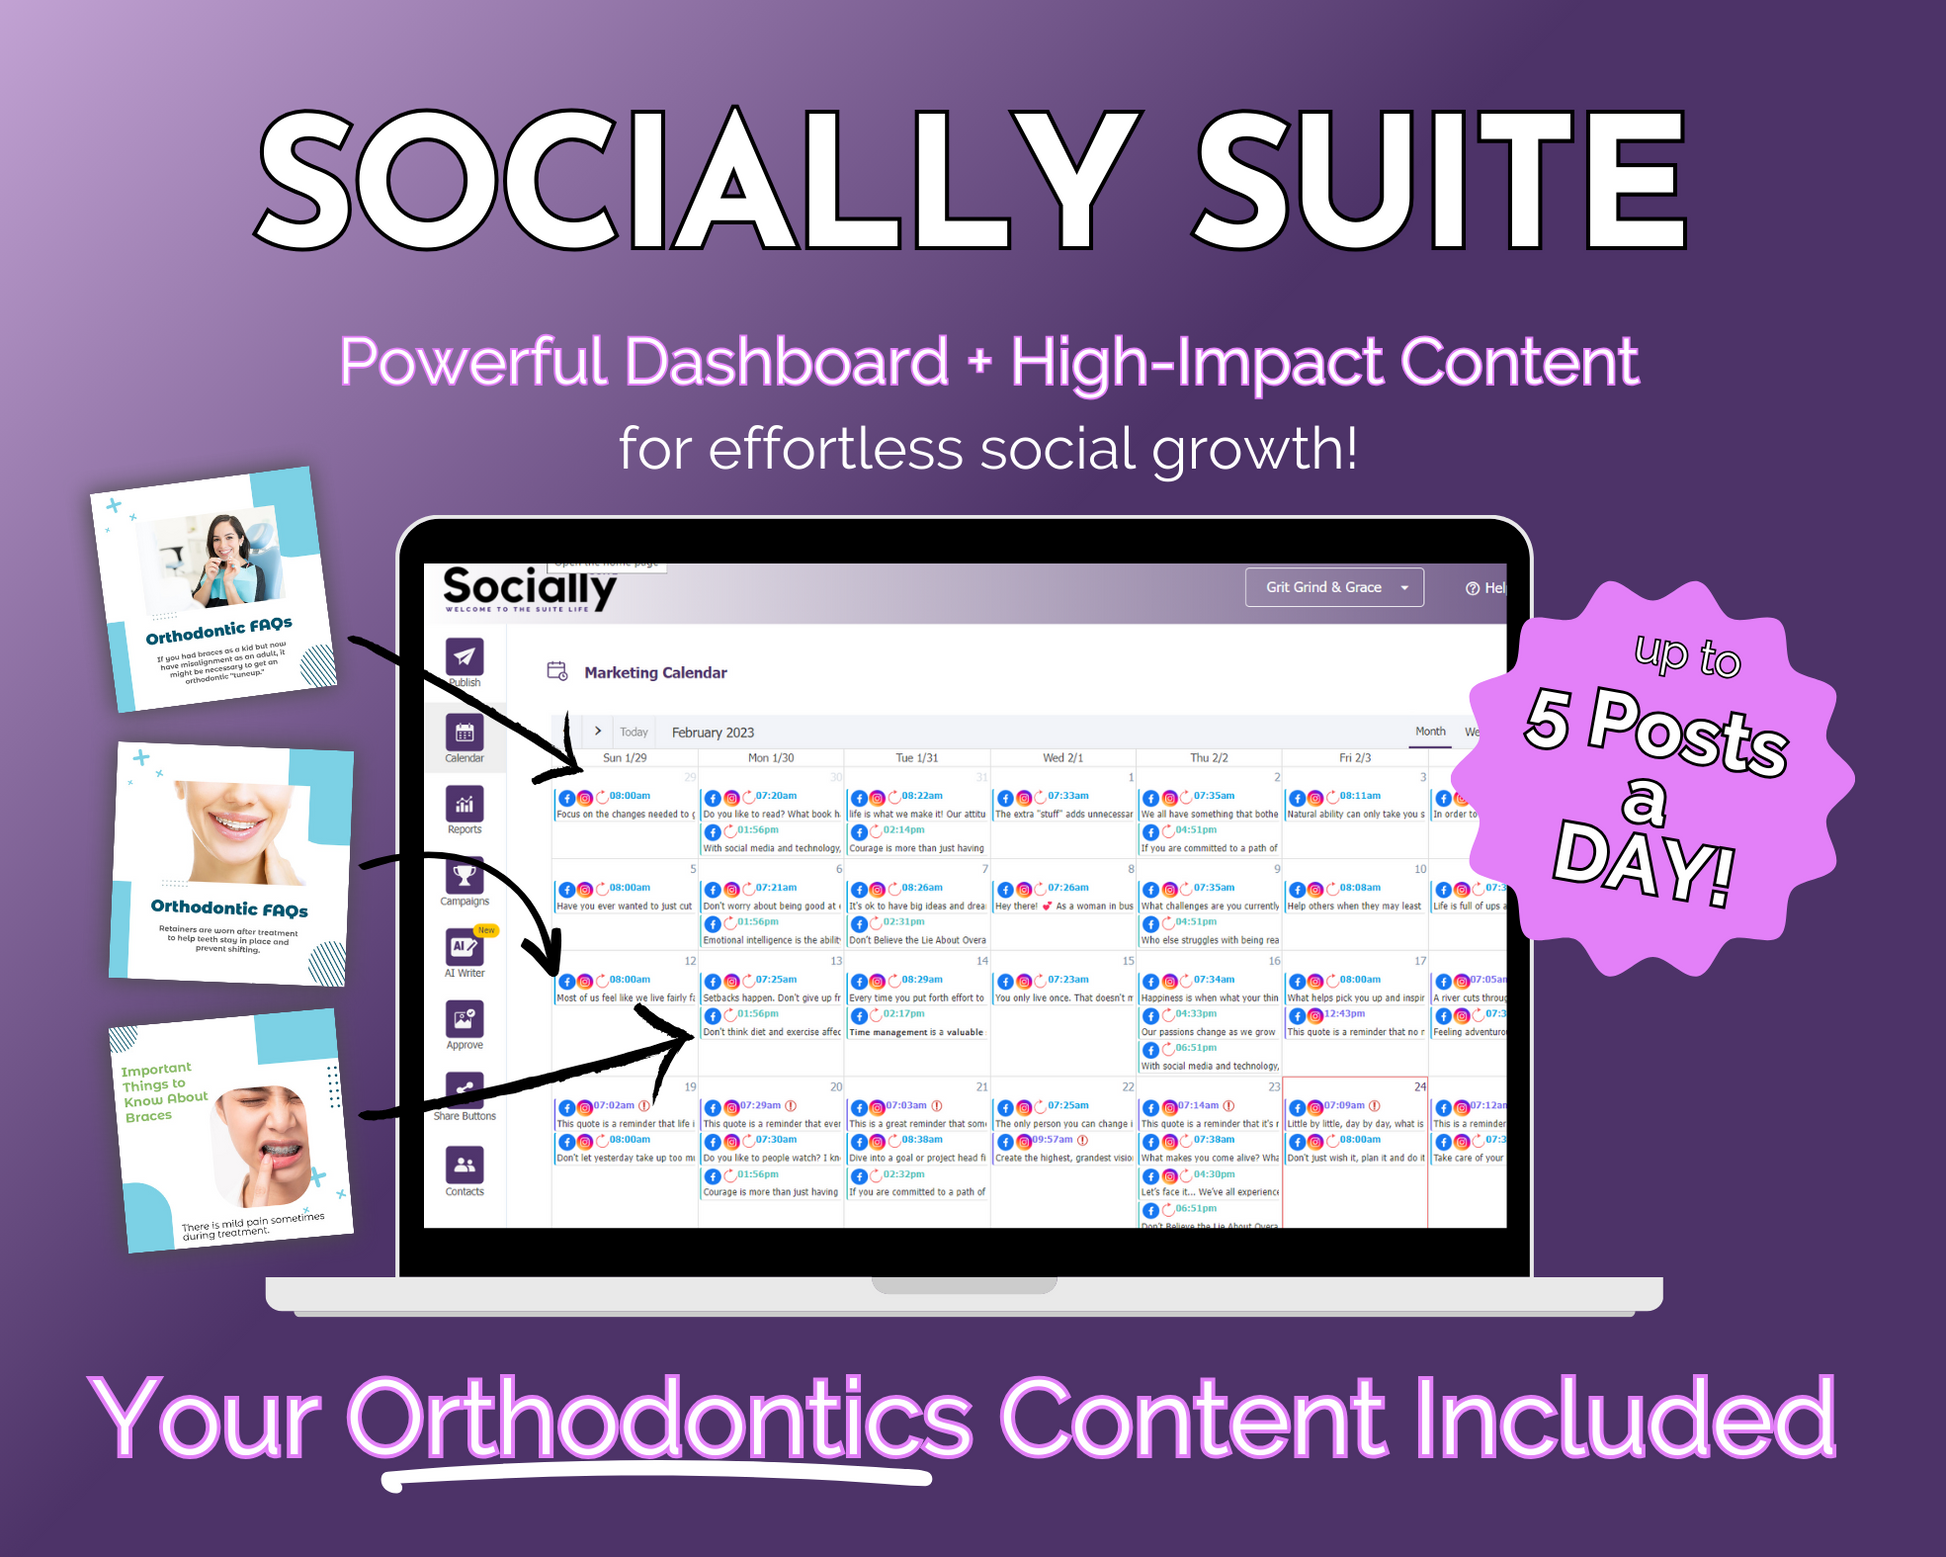 Get Socially Inclined's Socially Suite Membership - powerful dashboard for high content management on your orthodontics social media marketing.